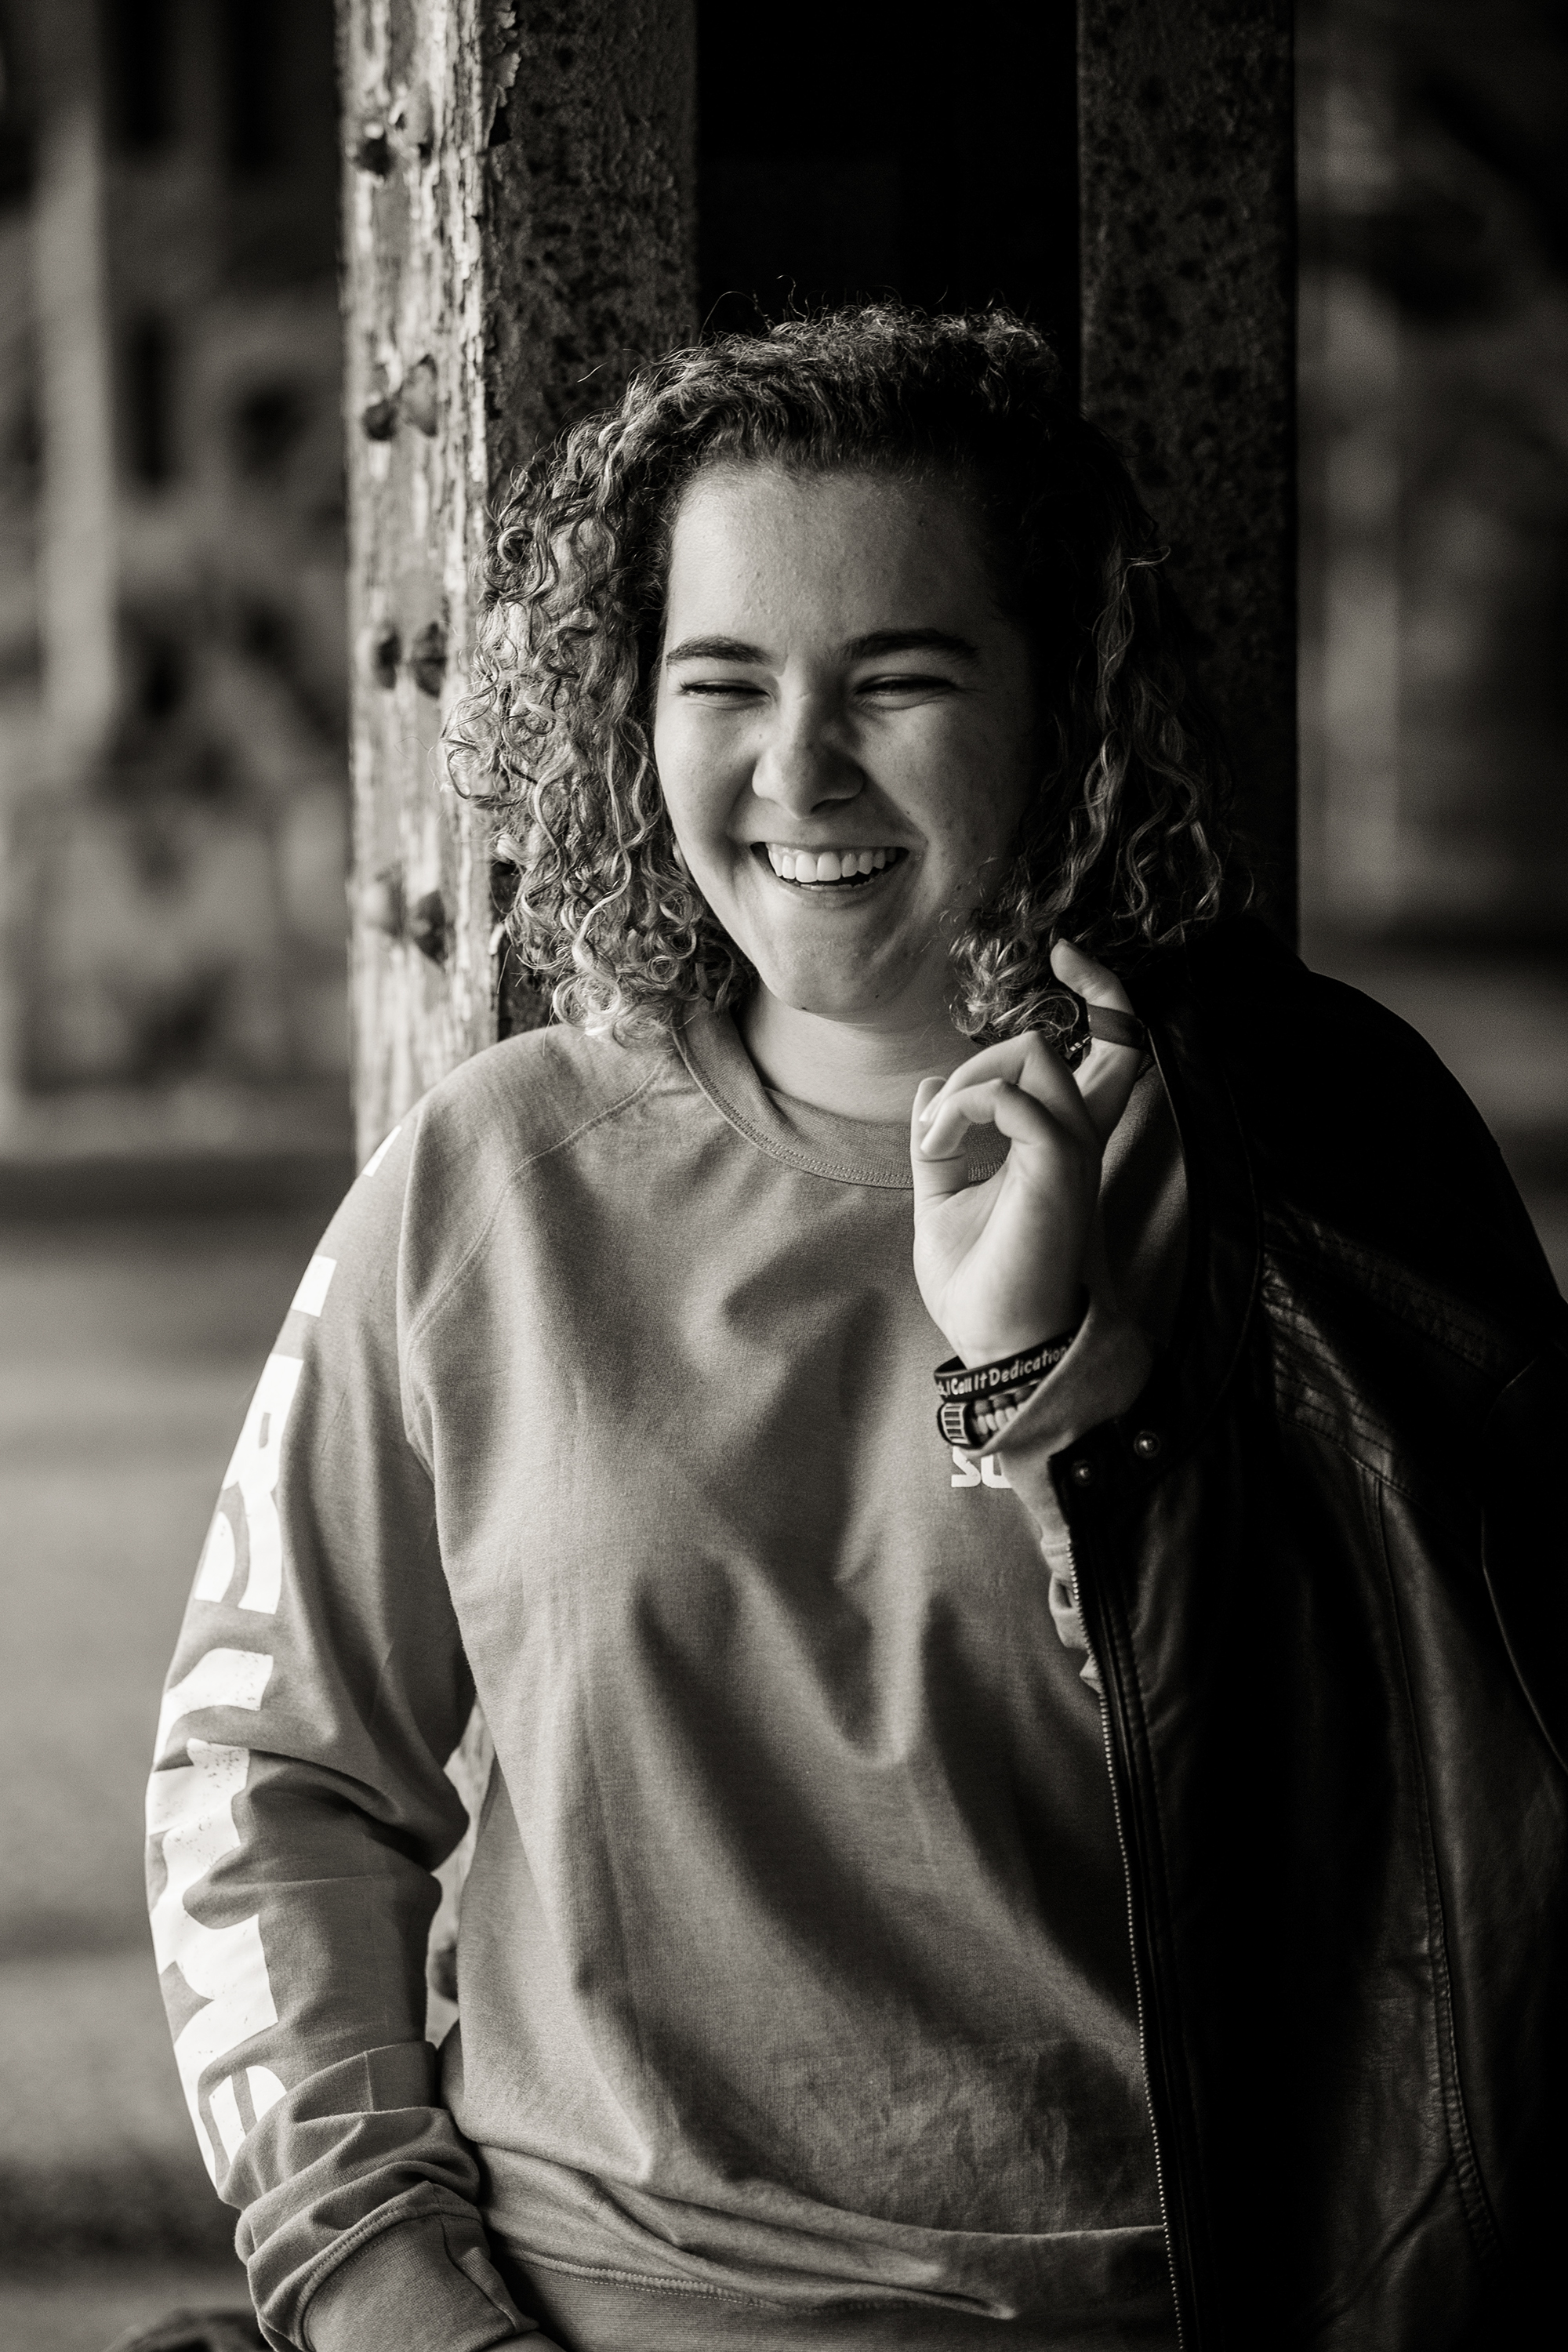 Erie senior portraits of laughing girl holding leather jacket under 14th St. underpass